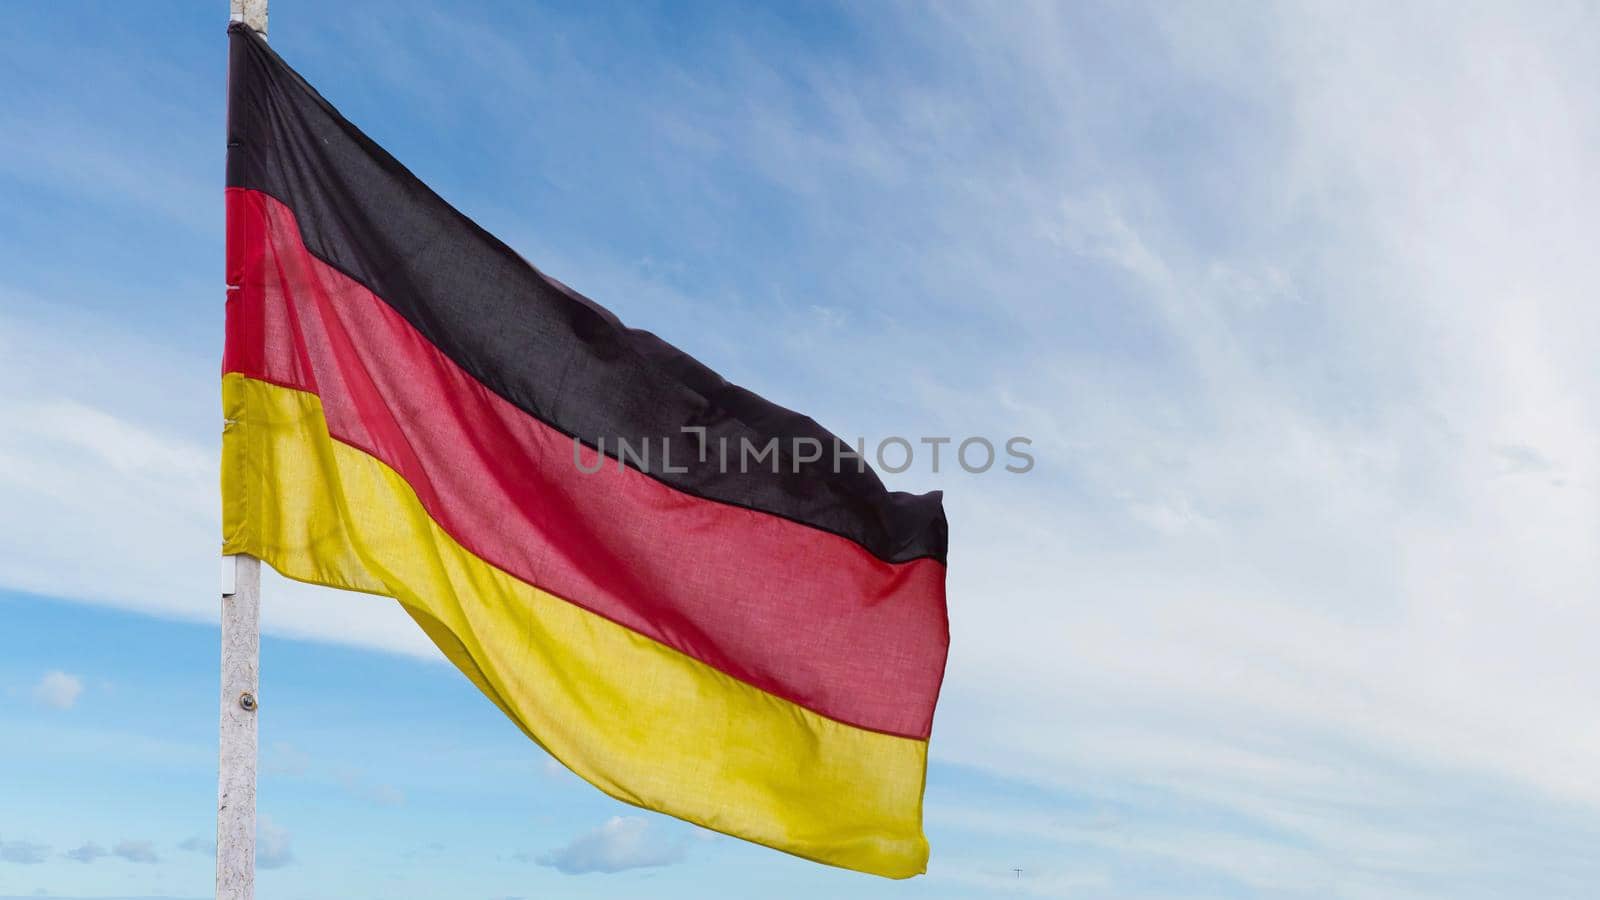 The official flag of Germany waving on a blue sky background. Horizontal banner design, with the German flag hanging on a sunny background with white clouds. Deutschland flag wide banner by Andelov13